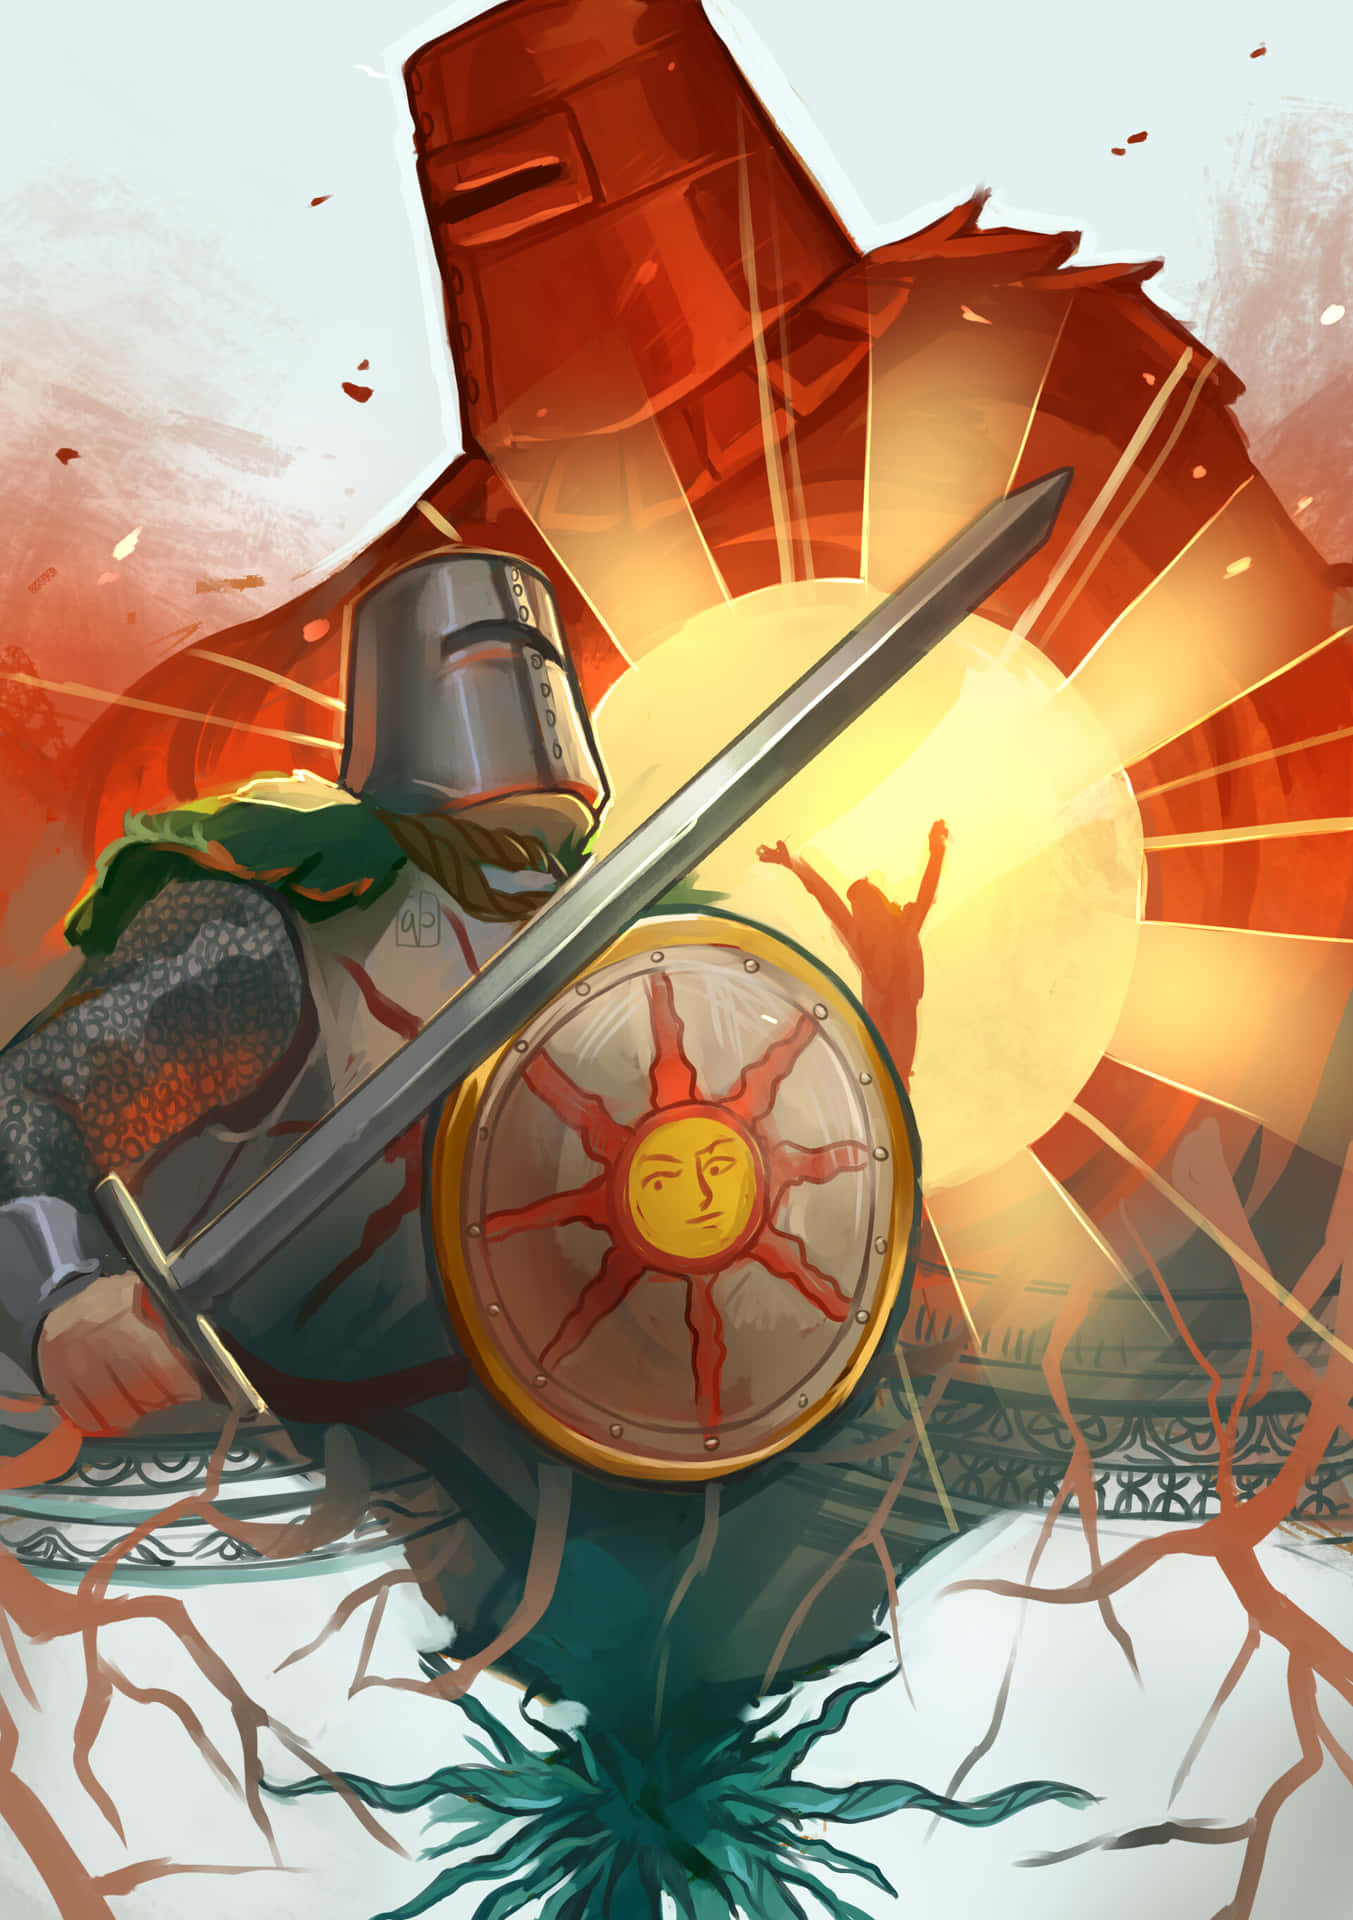 "O Solaire, the beloved Knight of Sunlight." Wallpaper